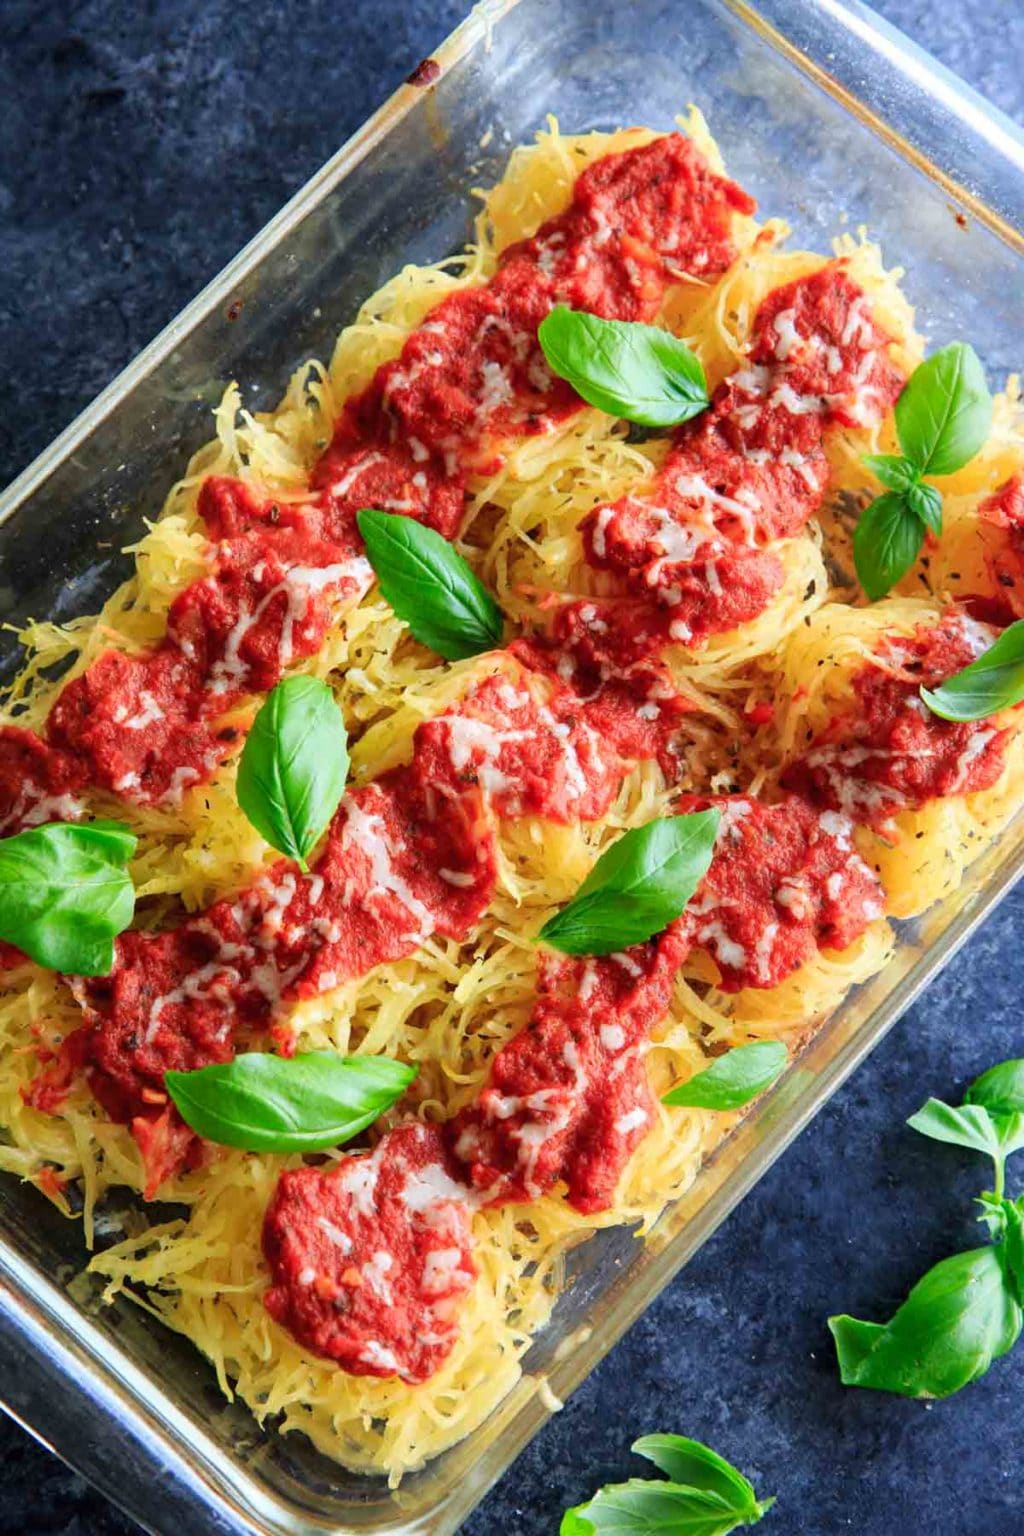 Spaghetti Squash Nests garnished with fresh basil are the perfect dinner appetizer for your guests. Customizable and delicious! Vegan-friendly and gluten-free.